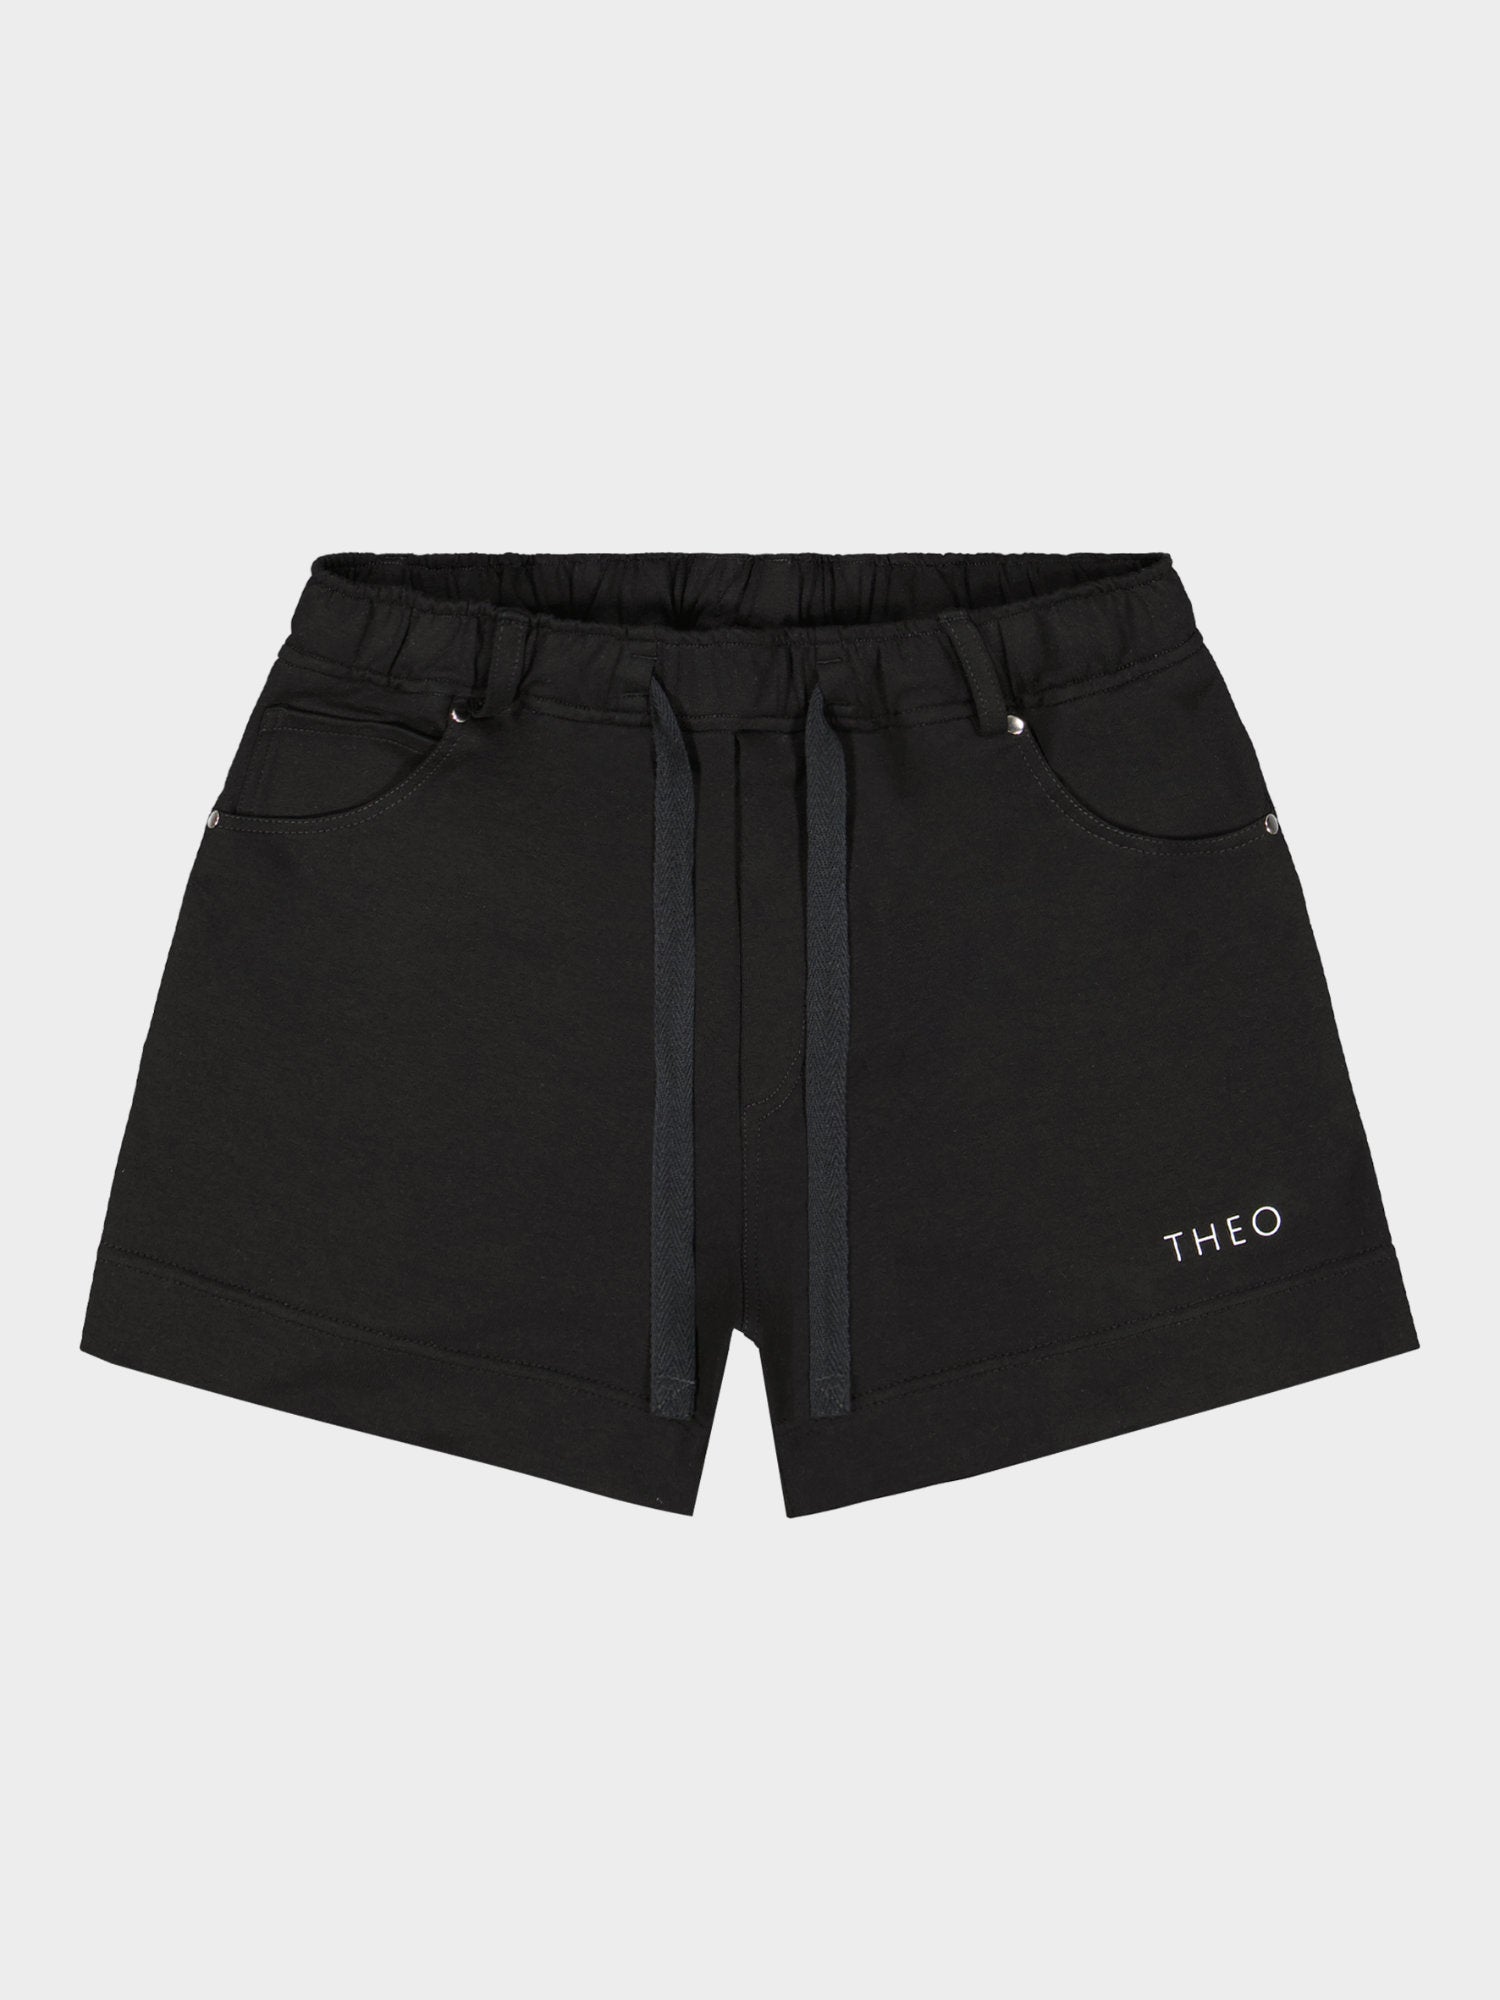 JERSEY MINI SHORTS WITH 3D THEO LOGO